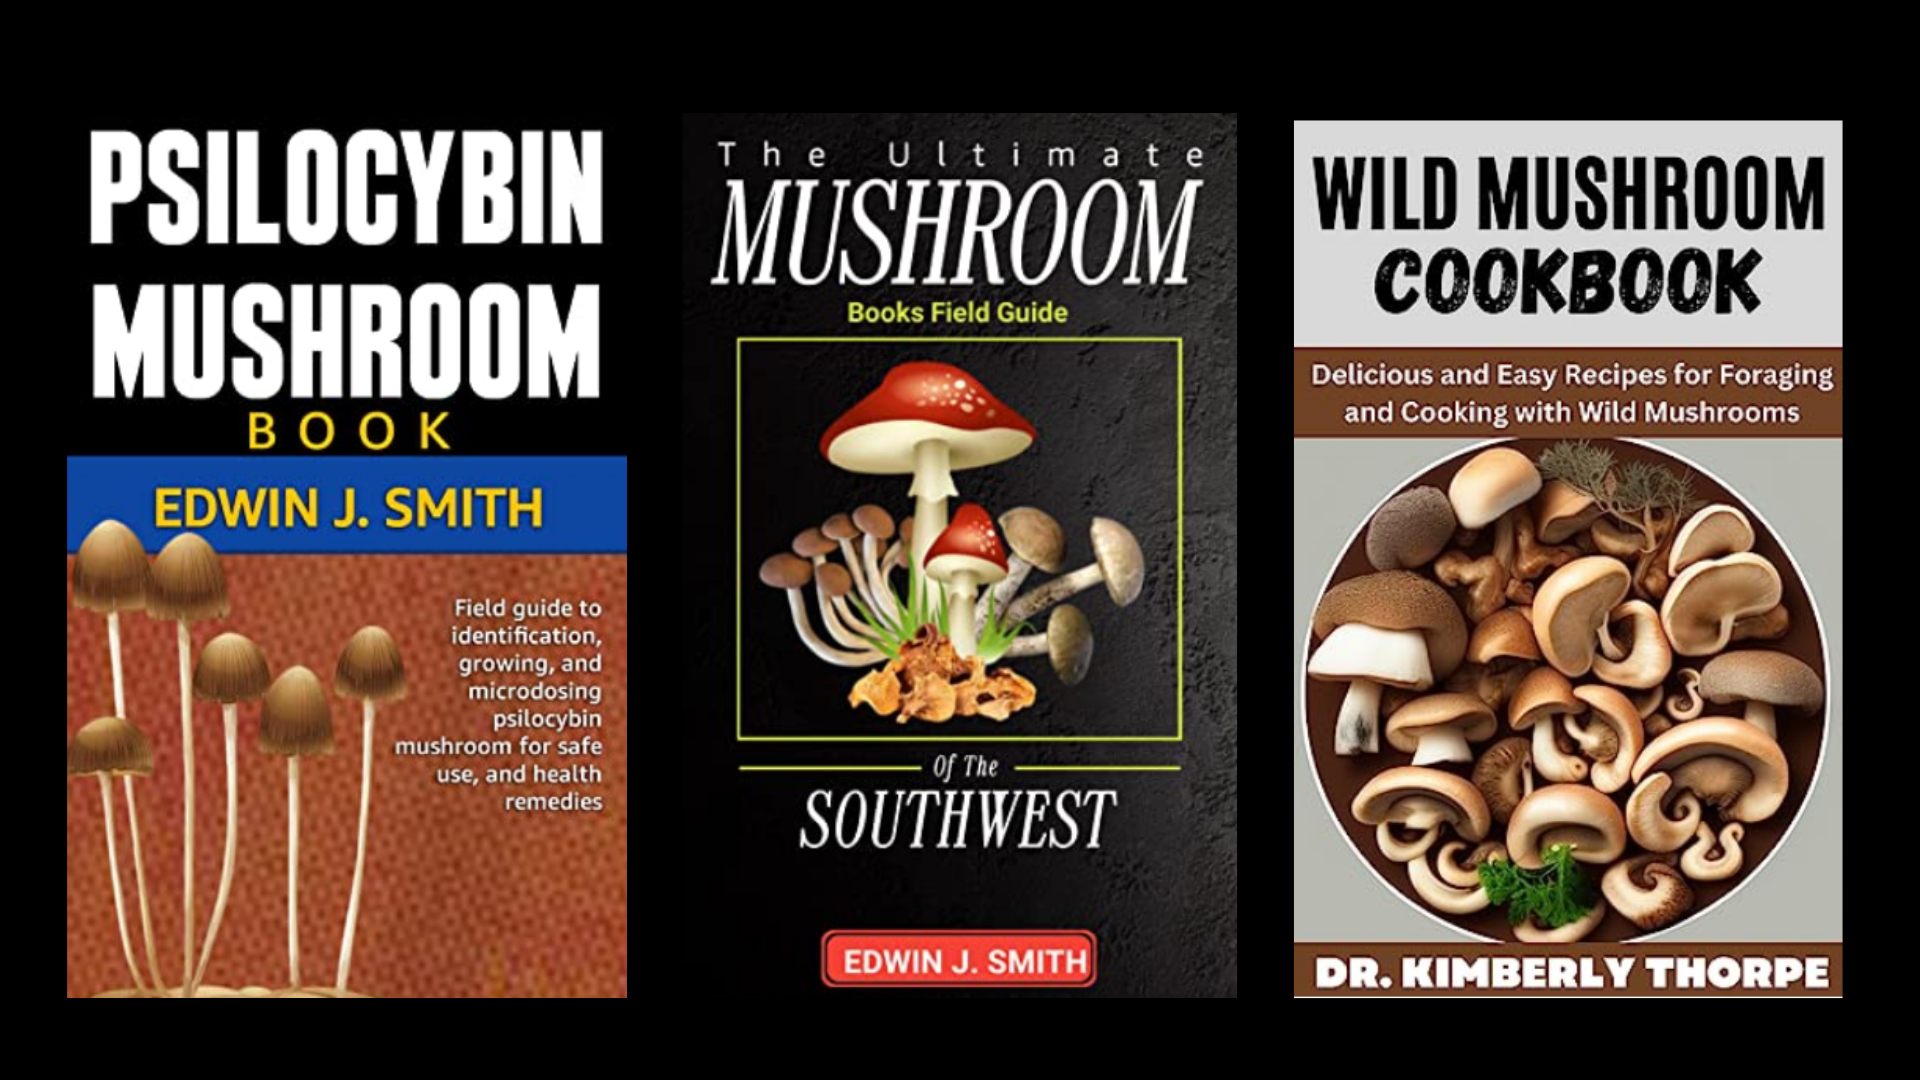 Three books suspected of being AI-generated, according to the detection tools 404 Media used. Psilocybin Mushroom Book by Edwin J. Smith; The Ultimate Mushroom Books Field Guide by Edwin J. Smith; Wild Mushroom Cookbook by Dr. Kimberly Thorpe